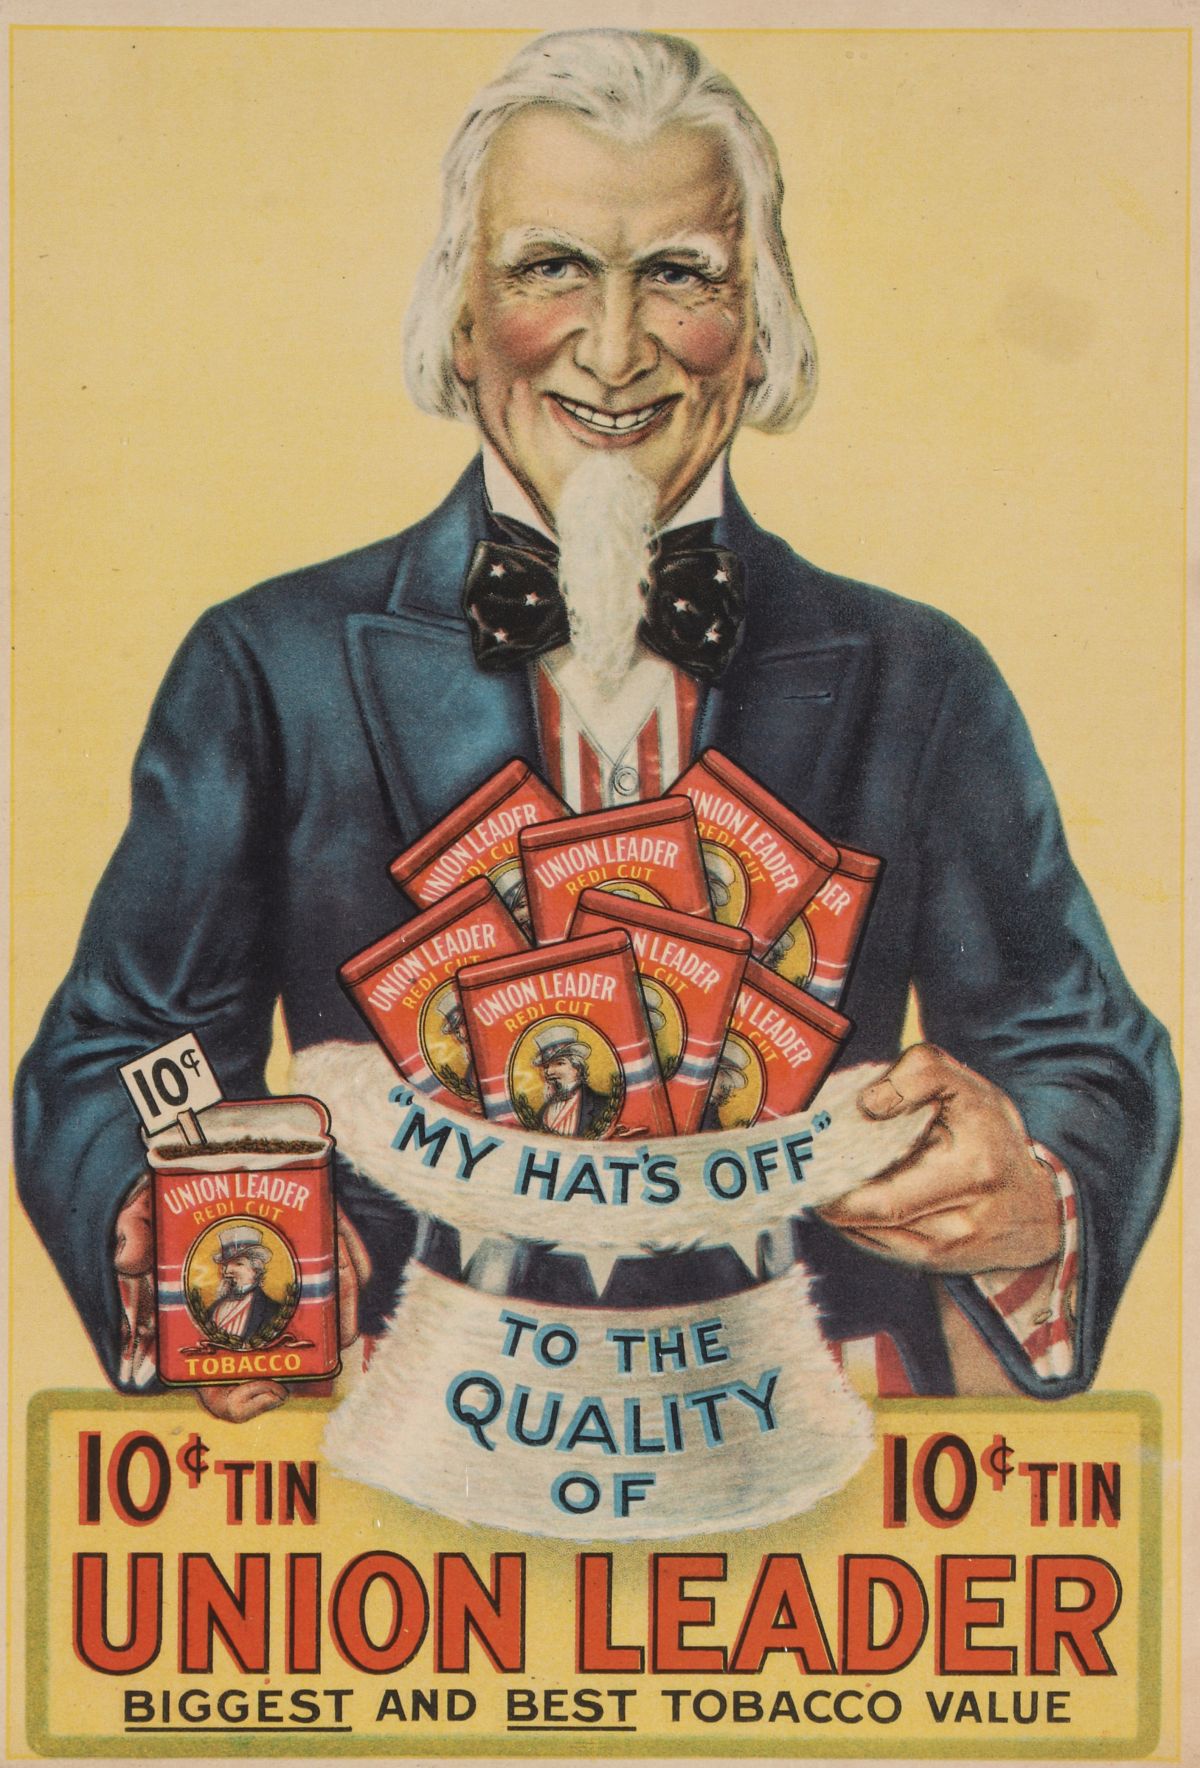 A GREAT UNION LEADER TOBACCO ADVERTISING POSTER